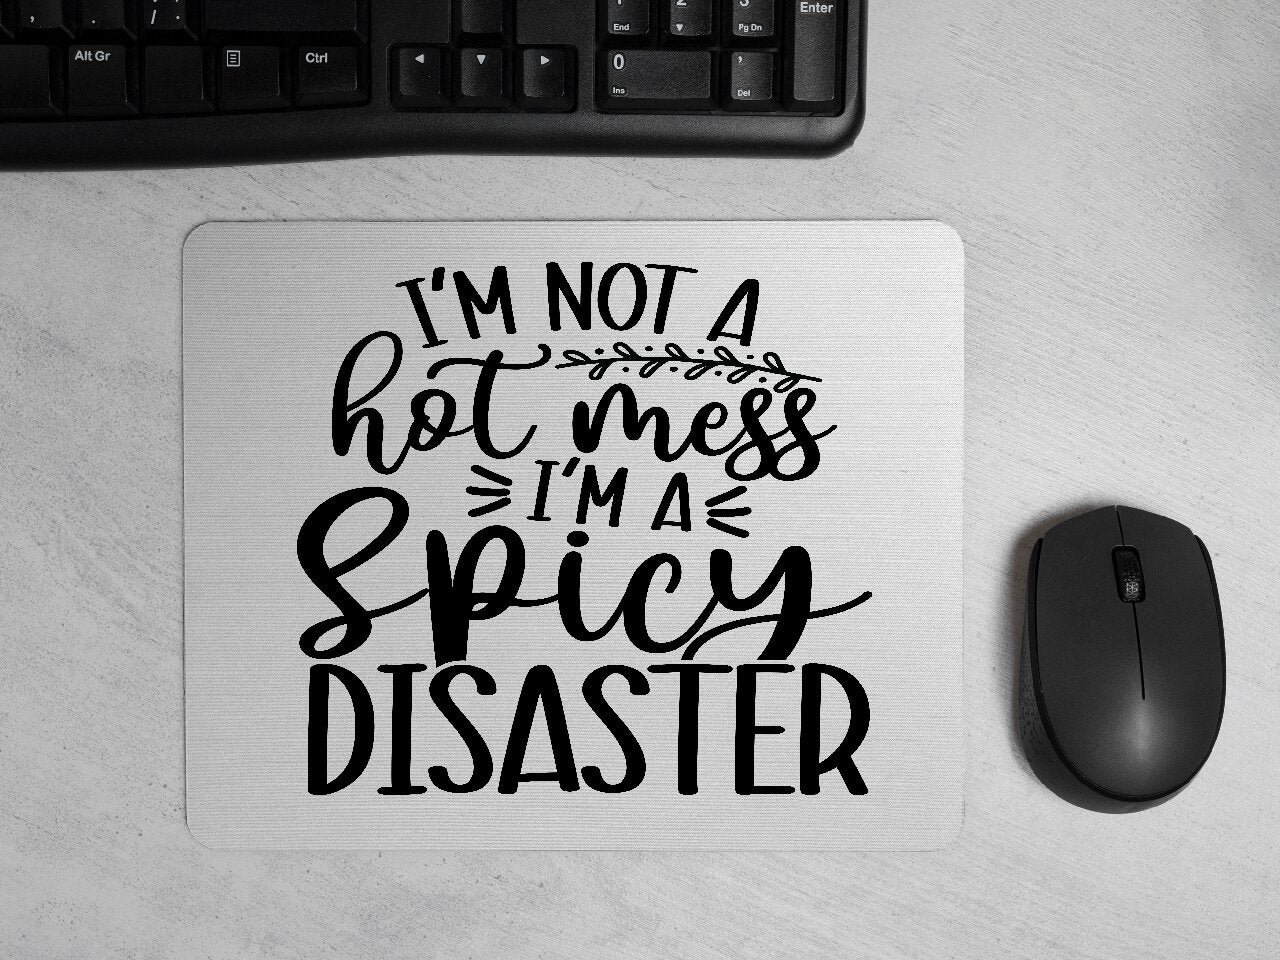 I'm Not A Hot Mess, I'm A Spicy Disaster - Mouse Pad